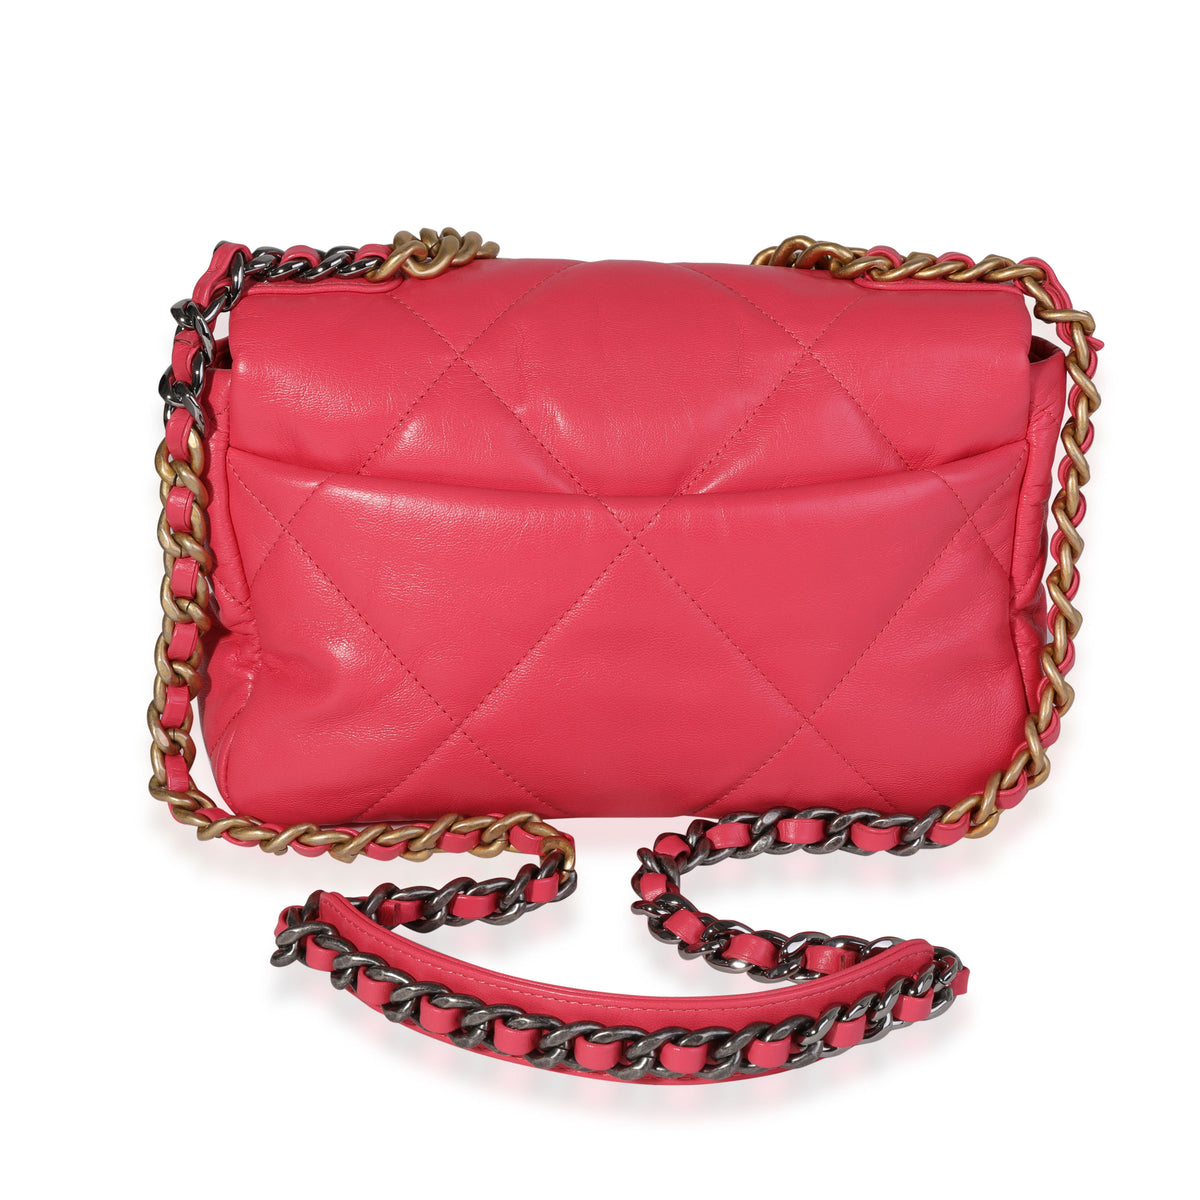 quilted handbags similar to chanel